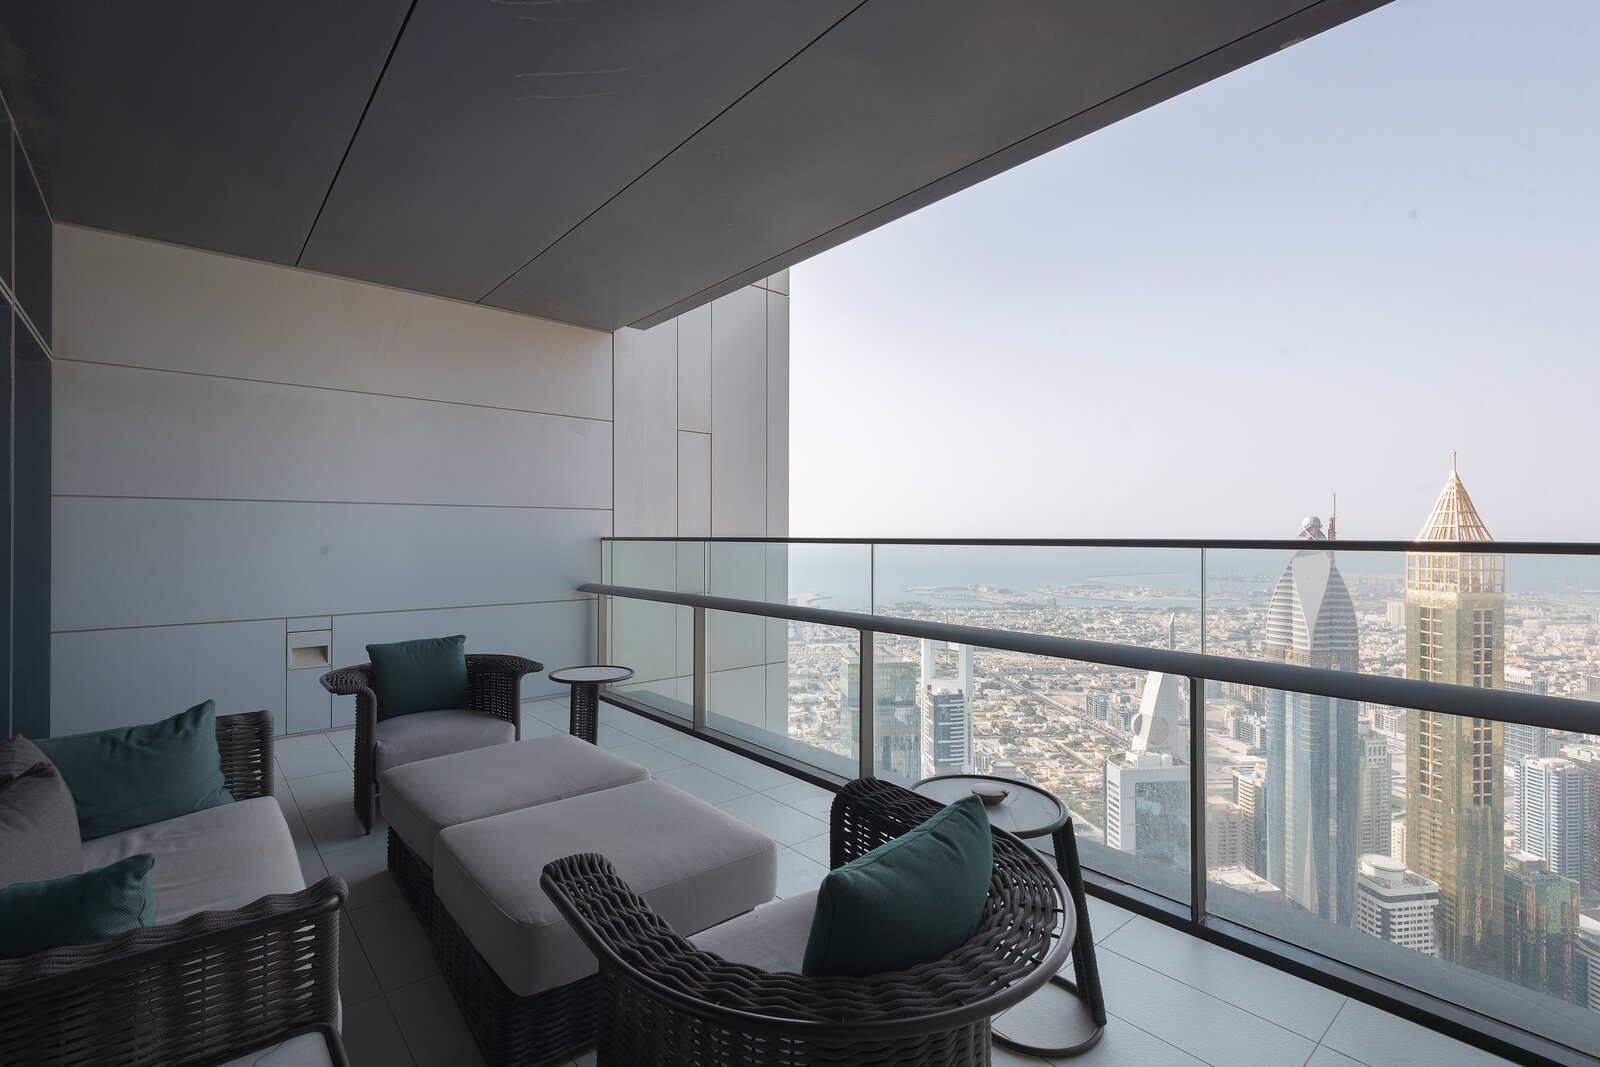 Asking $7M, This Sleek Duplex Apartment Allows You to Live Above the Clouds in Dubai